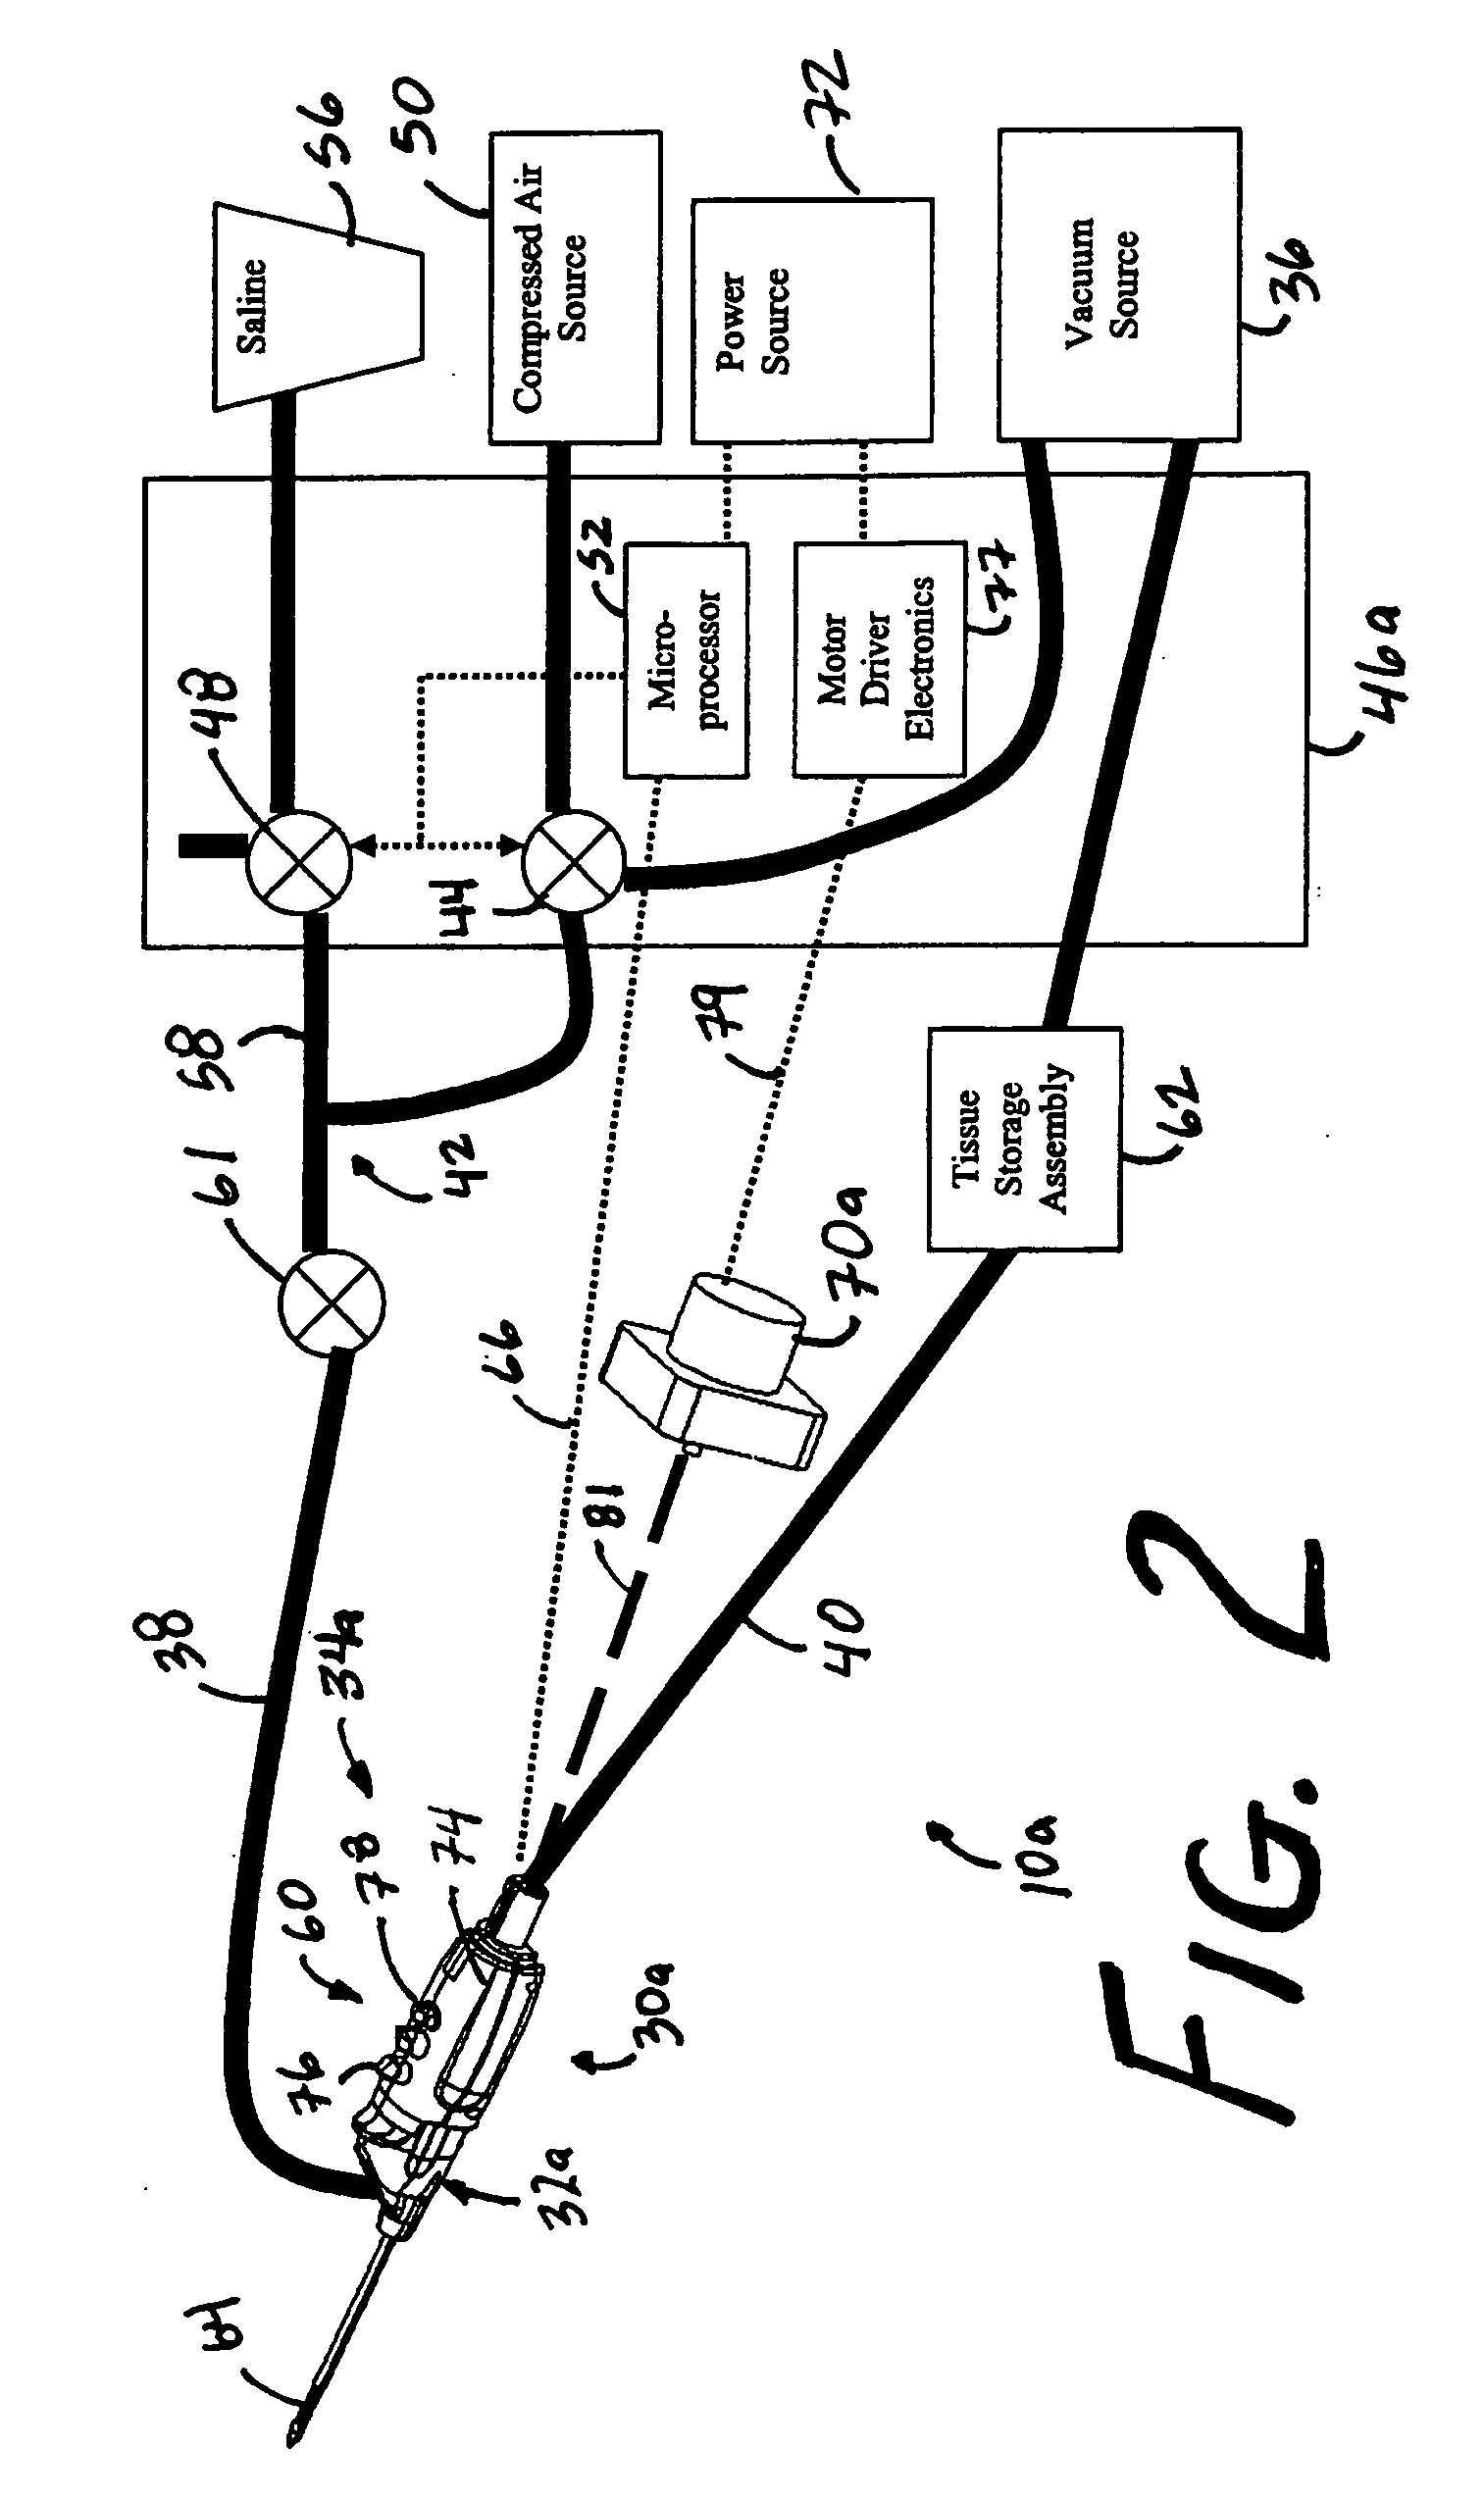 Core sampling biopsy device with short coupled MRI-compatible driver